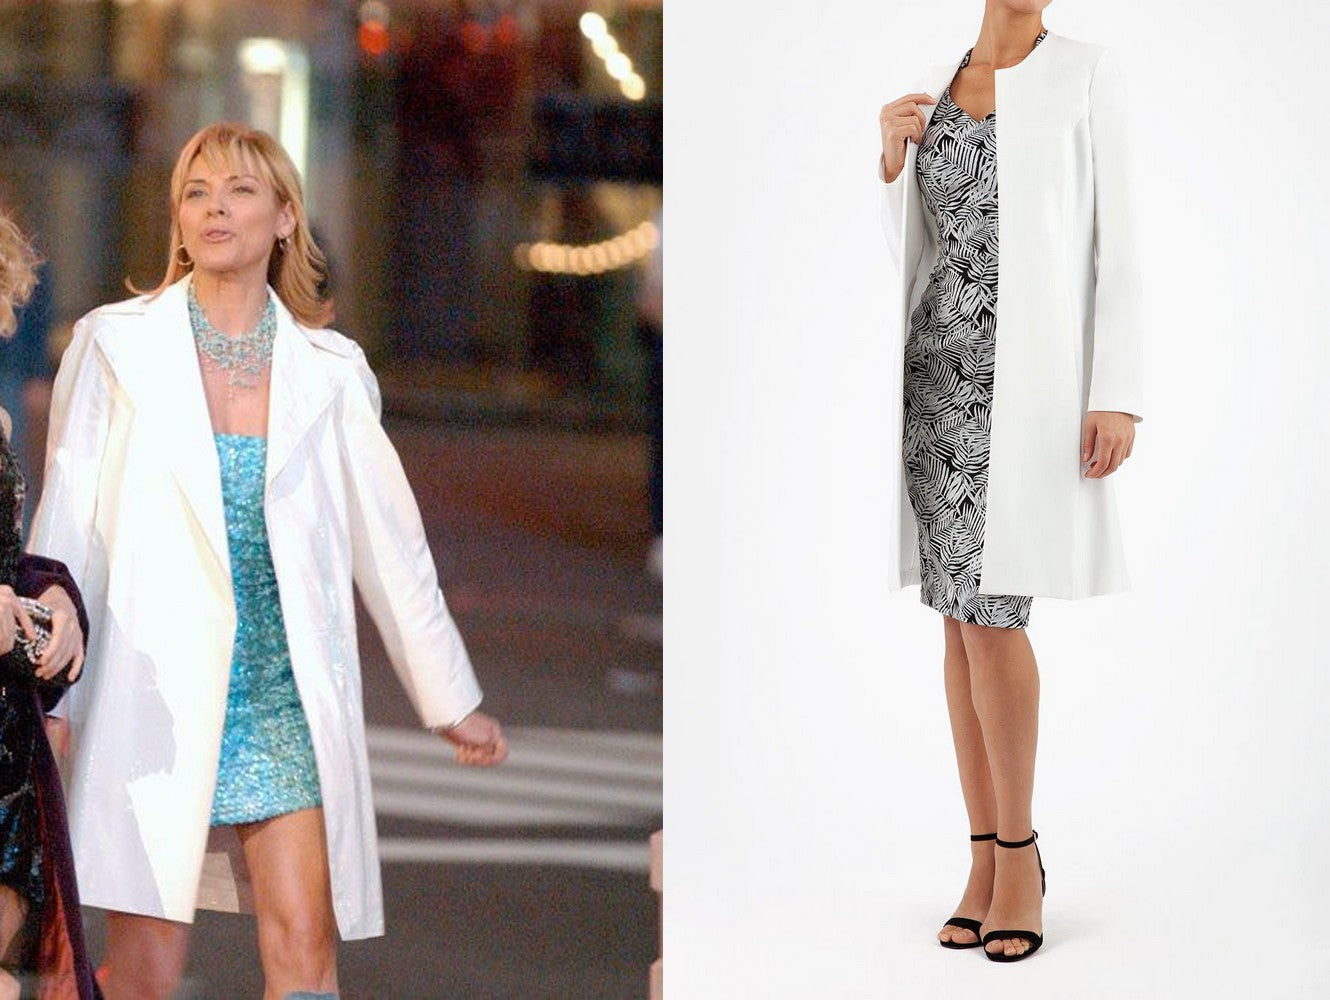 pictured is samantha jones in a long white coat - attached is an image of the Diva Catwalks Ivory Cream Twilight Long Sleeved Coat.